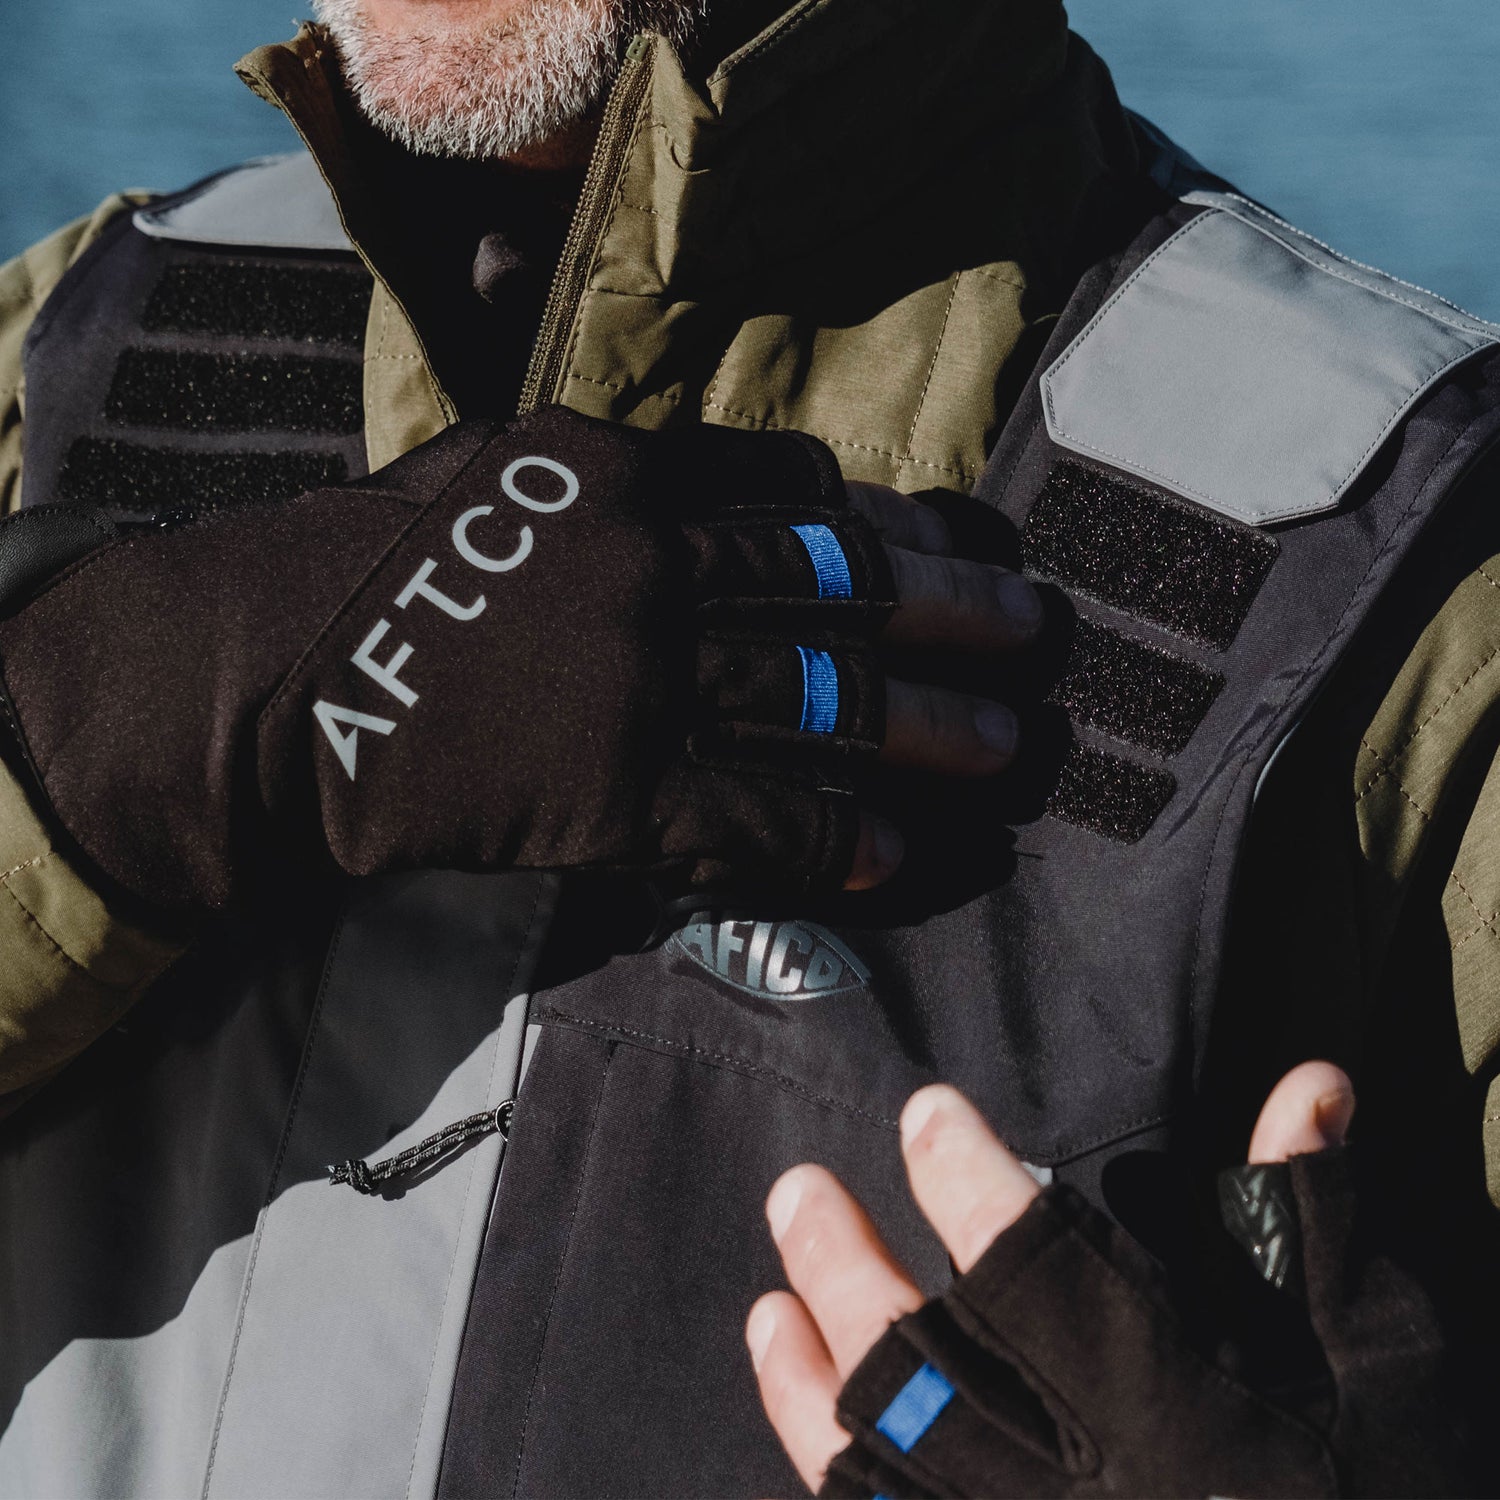 Men's Aftco Hydronaut Insulated Bibs